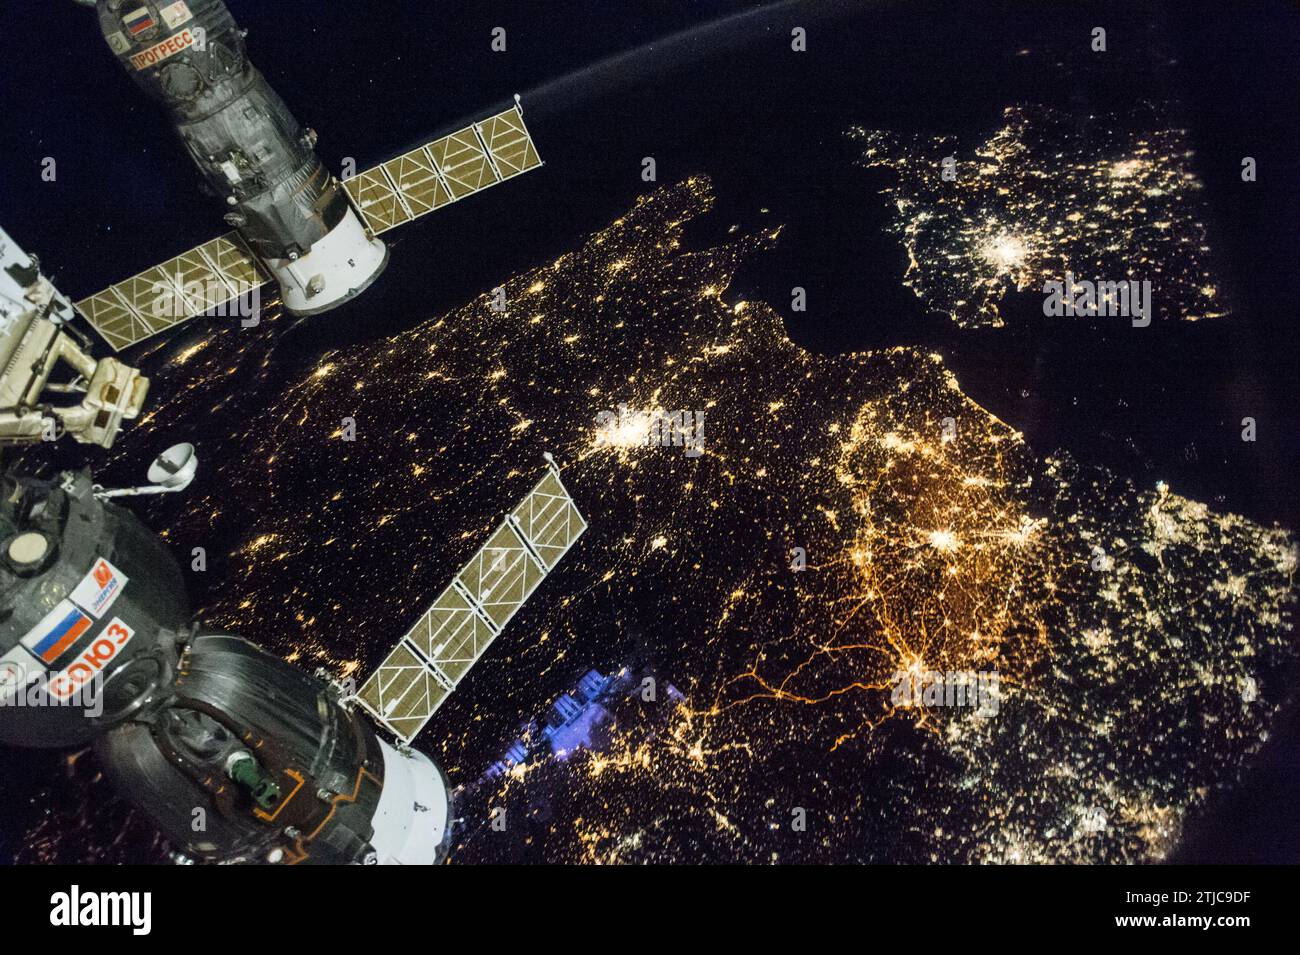 Crew on the International Space Station (ISS) crew capture a view of w estern Europe at night. 28 November 2016. The bright city lights of Paris can be seen  along with areas of Belgium,, the Netherlands  and England (top left).  An Optimised version of an original NASA image / Credit: NASA Stock Photo